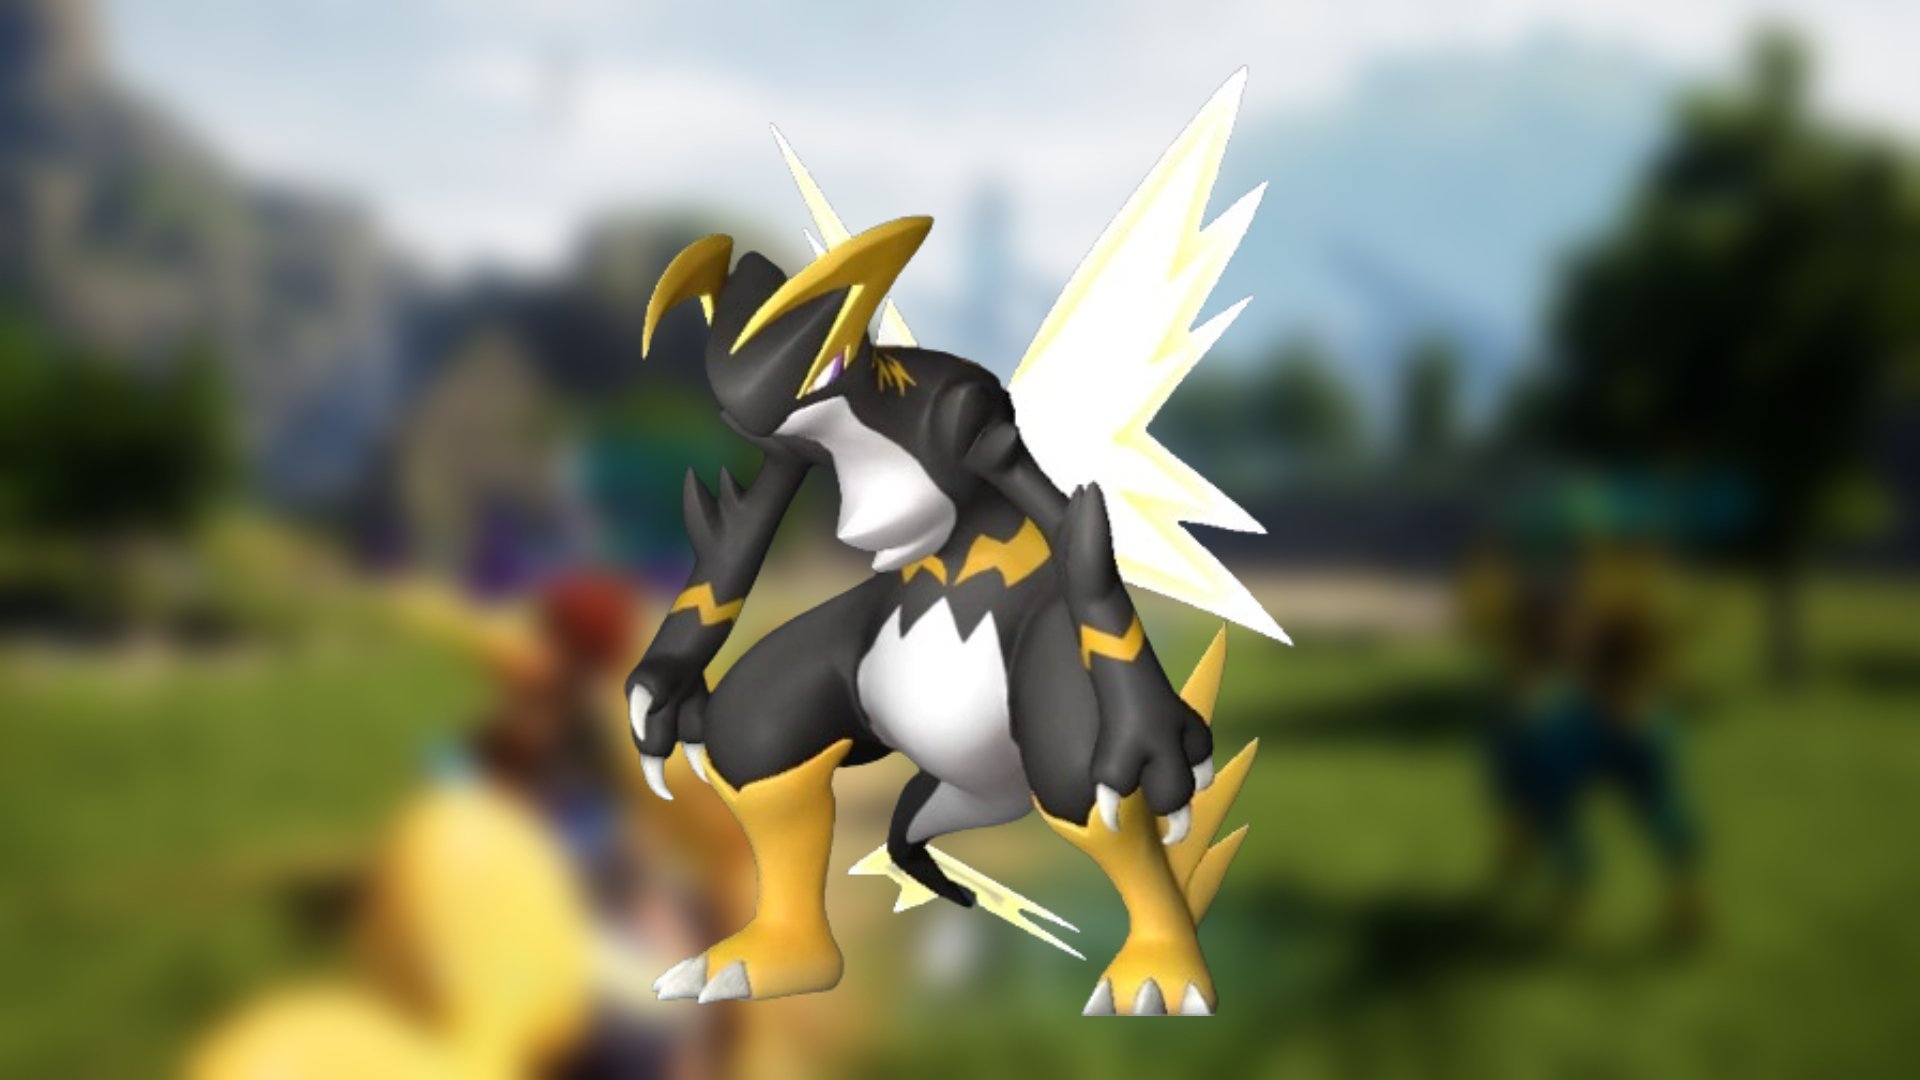 An image of Orserk from Palworld. It's a black, white, and yellow dragon-like creature with sharp horns and jagged wings. The background is a blurred screenshot from the game.